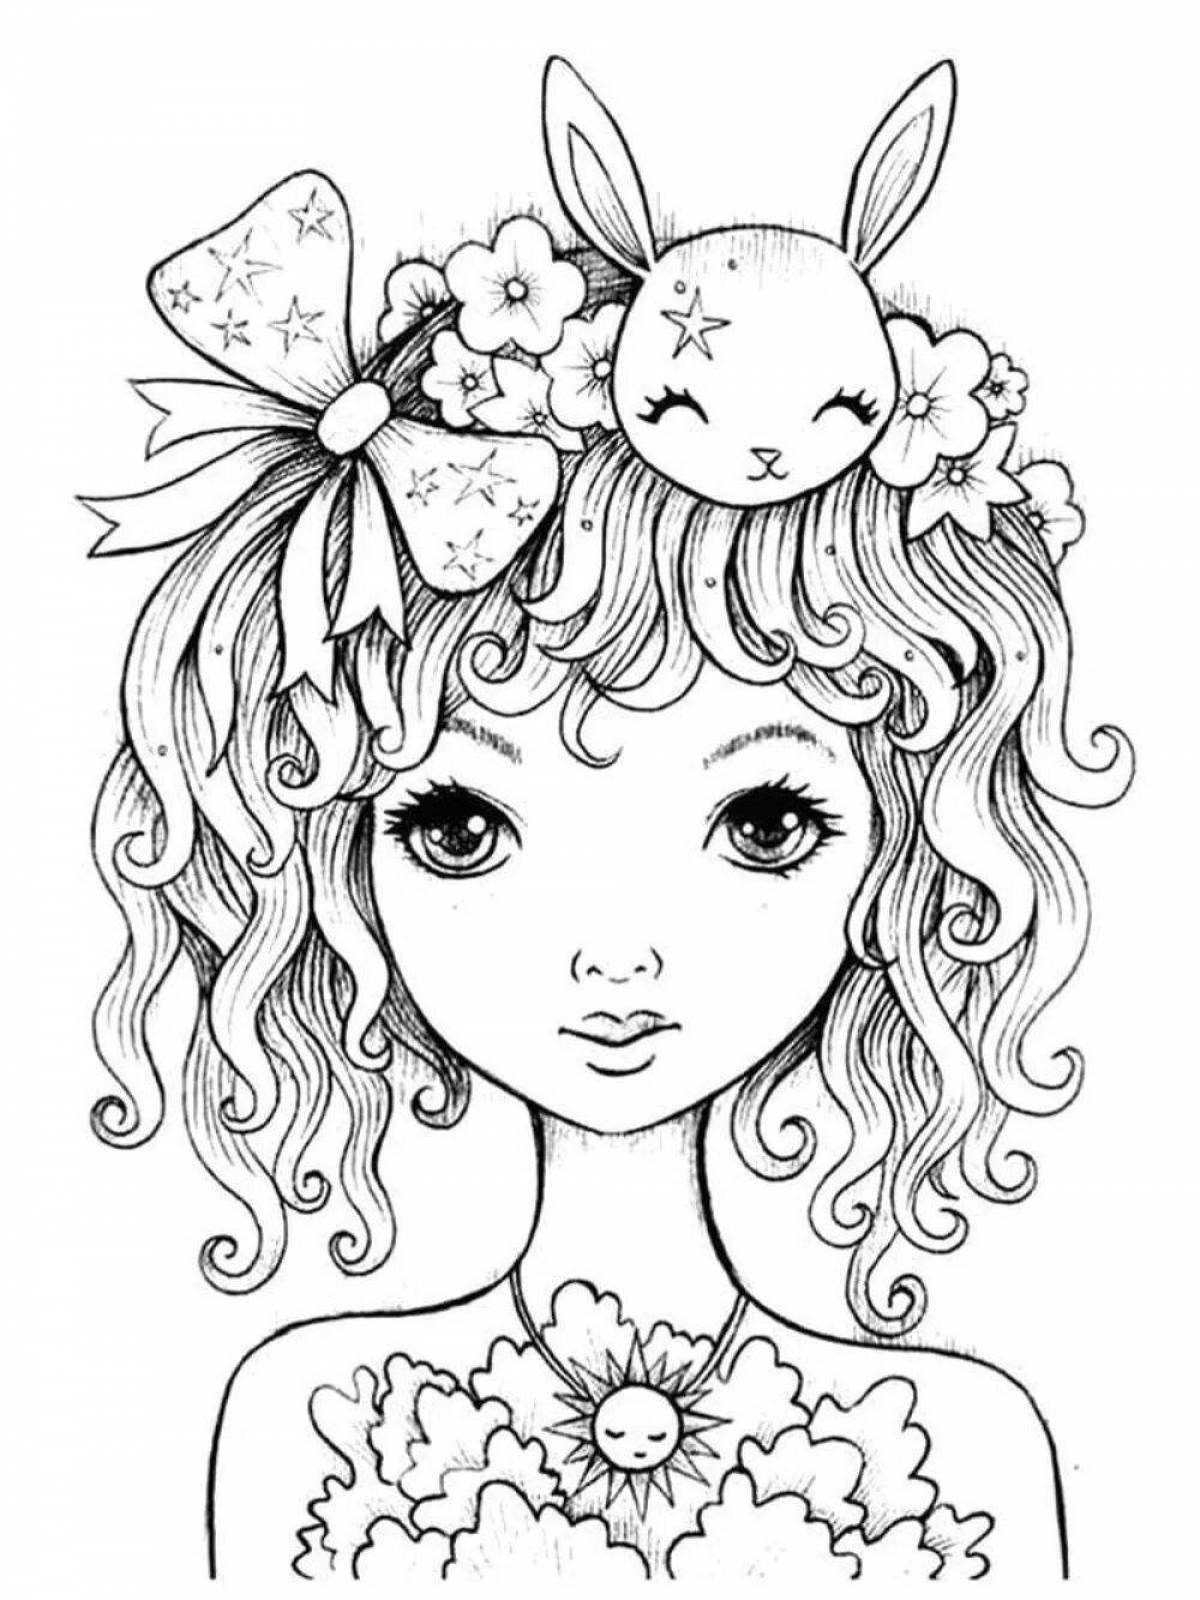 Radiant coloring page 16 for girls